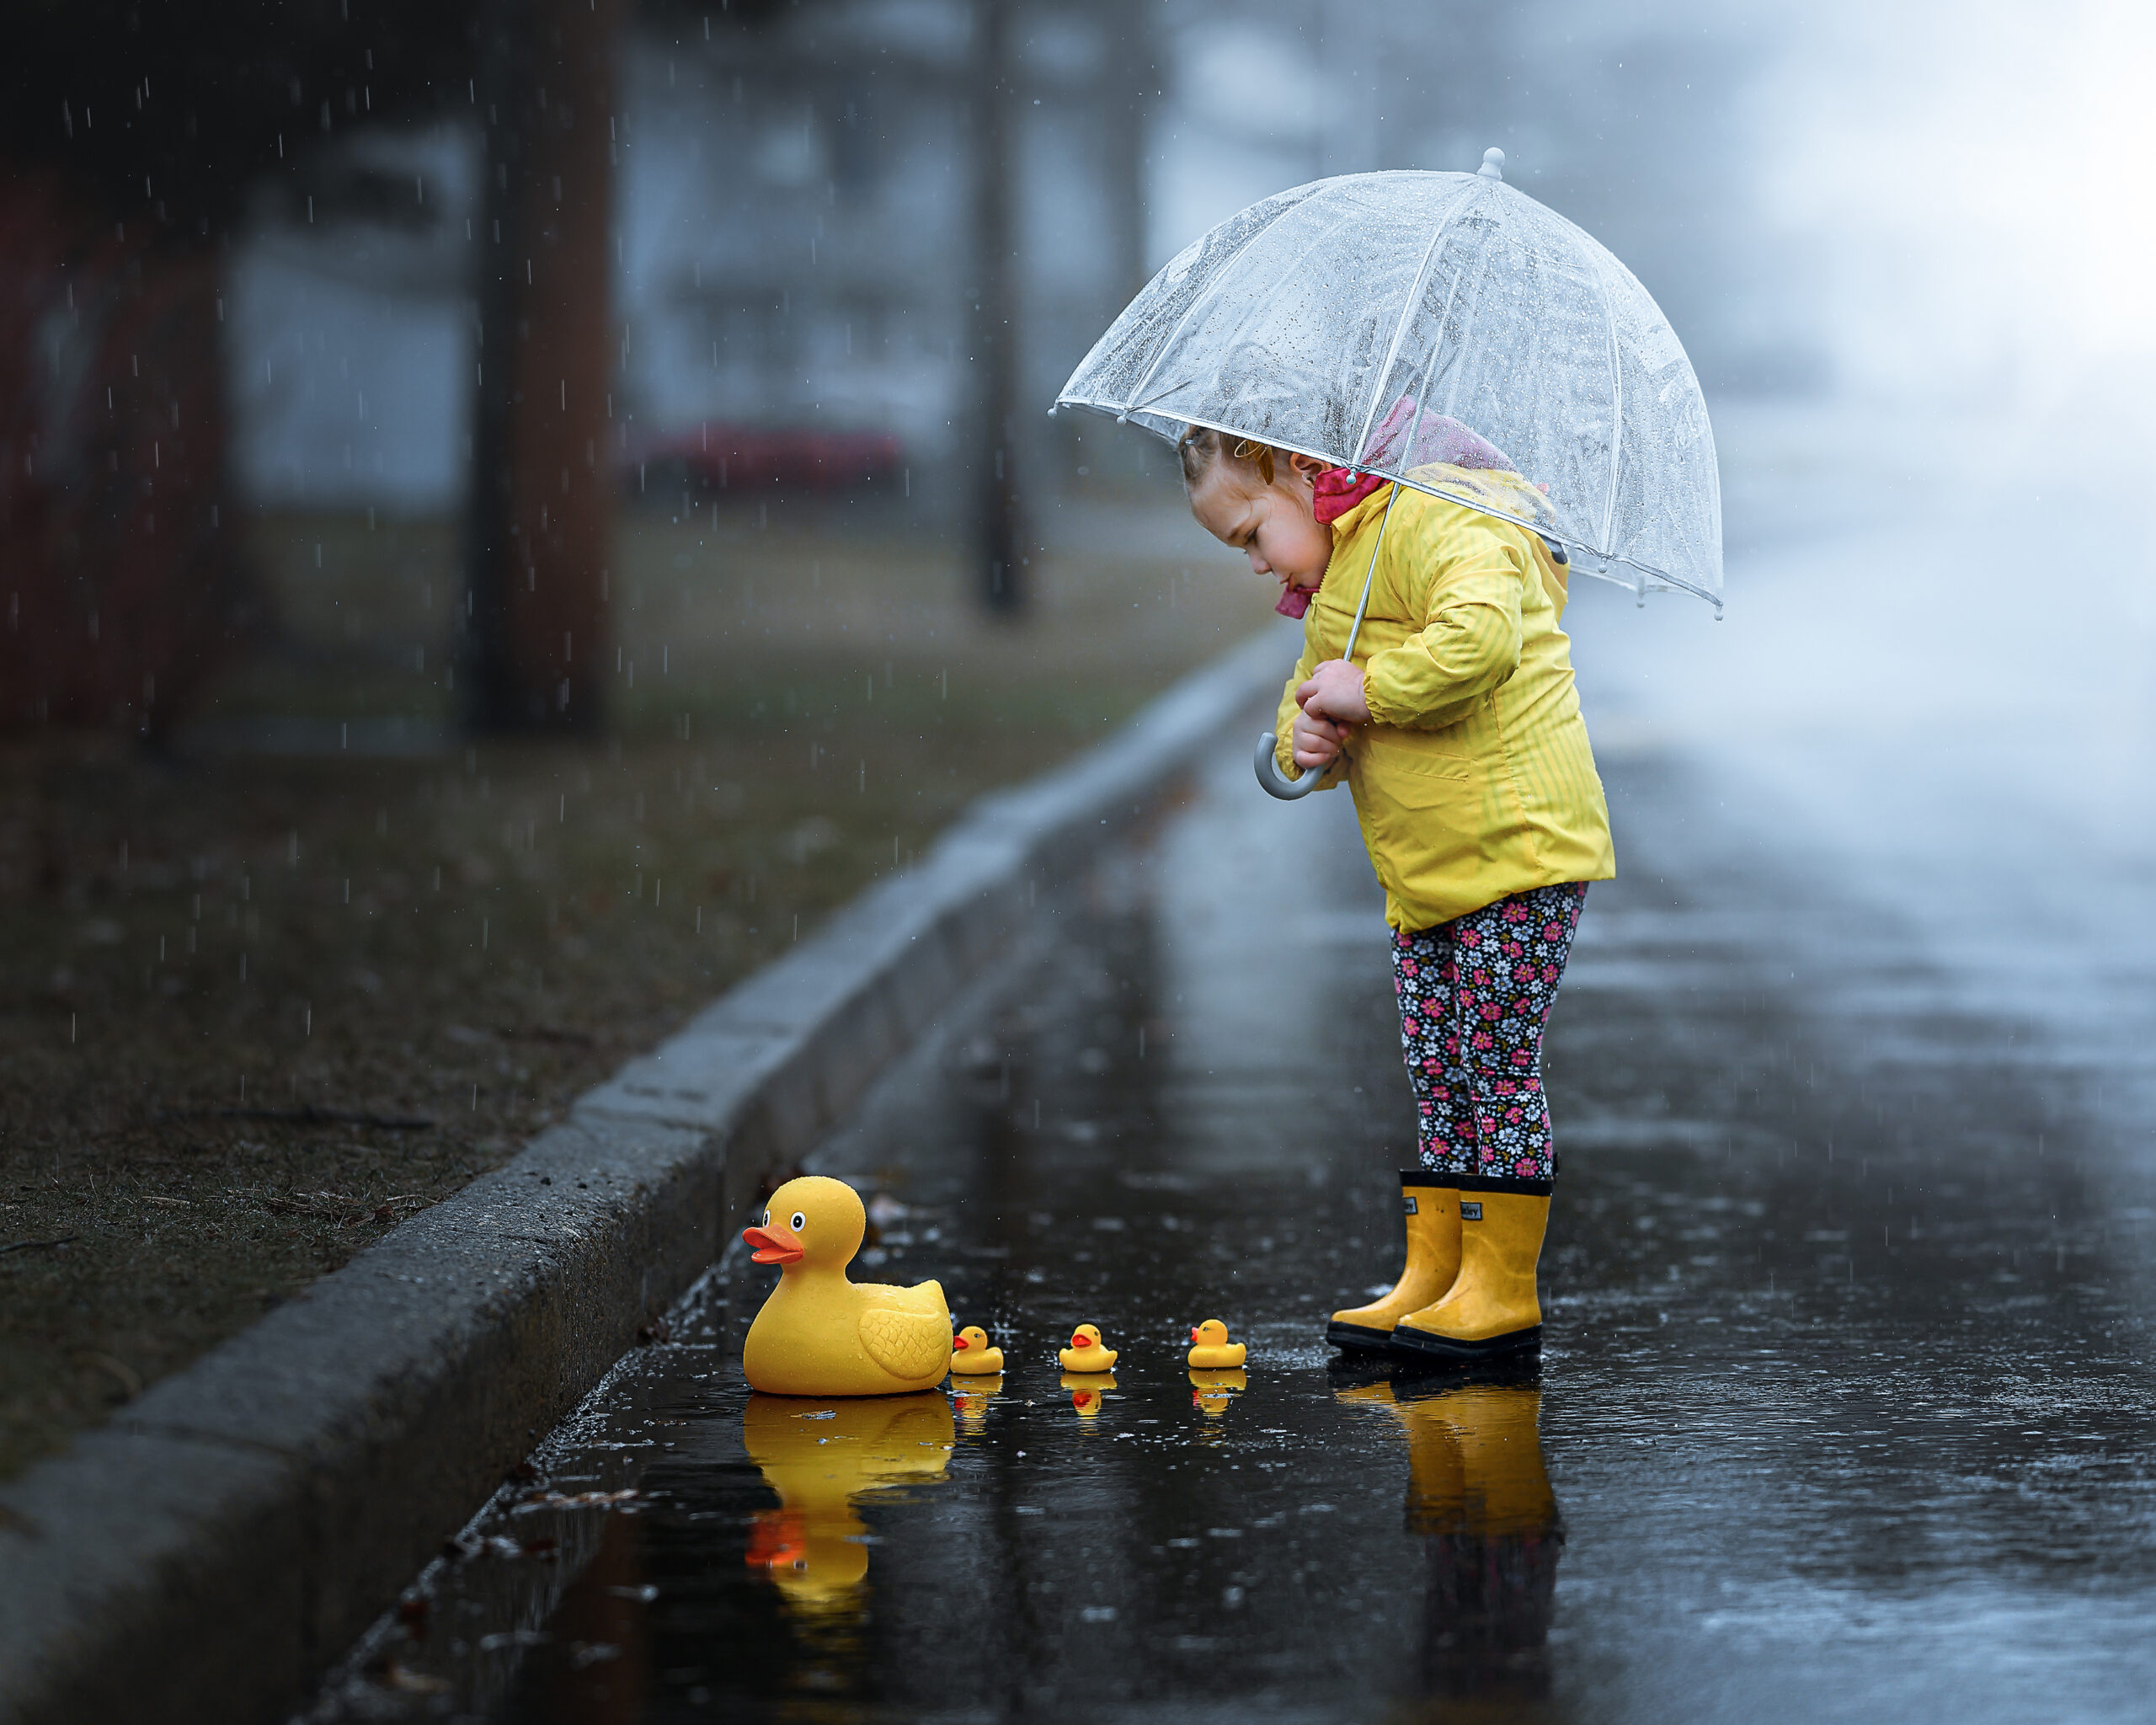 Child playing in the rain with rubber duckies